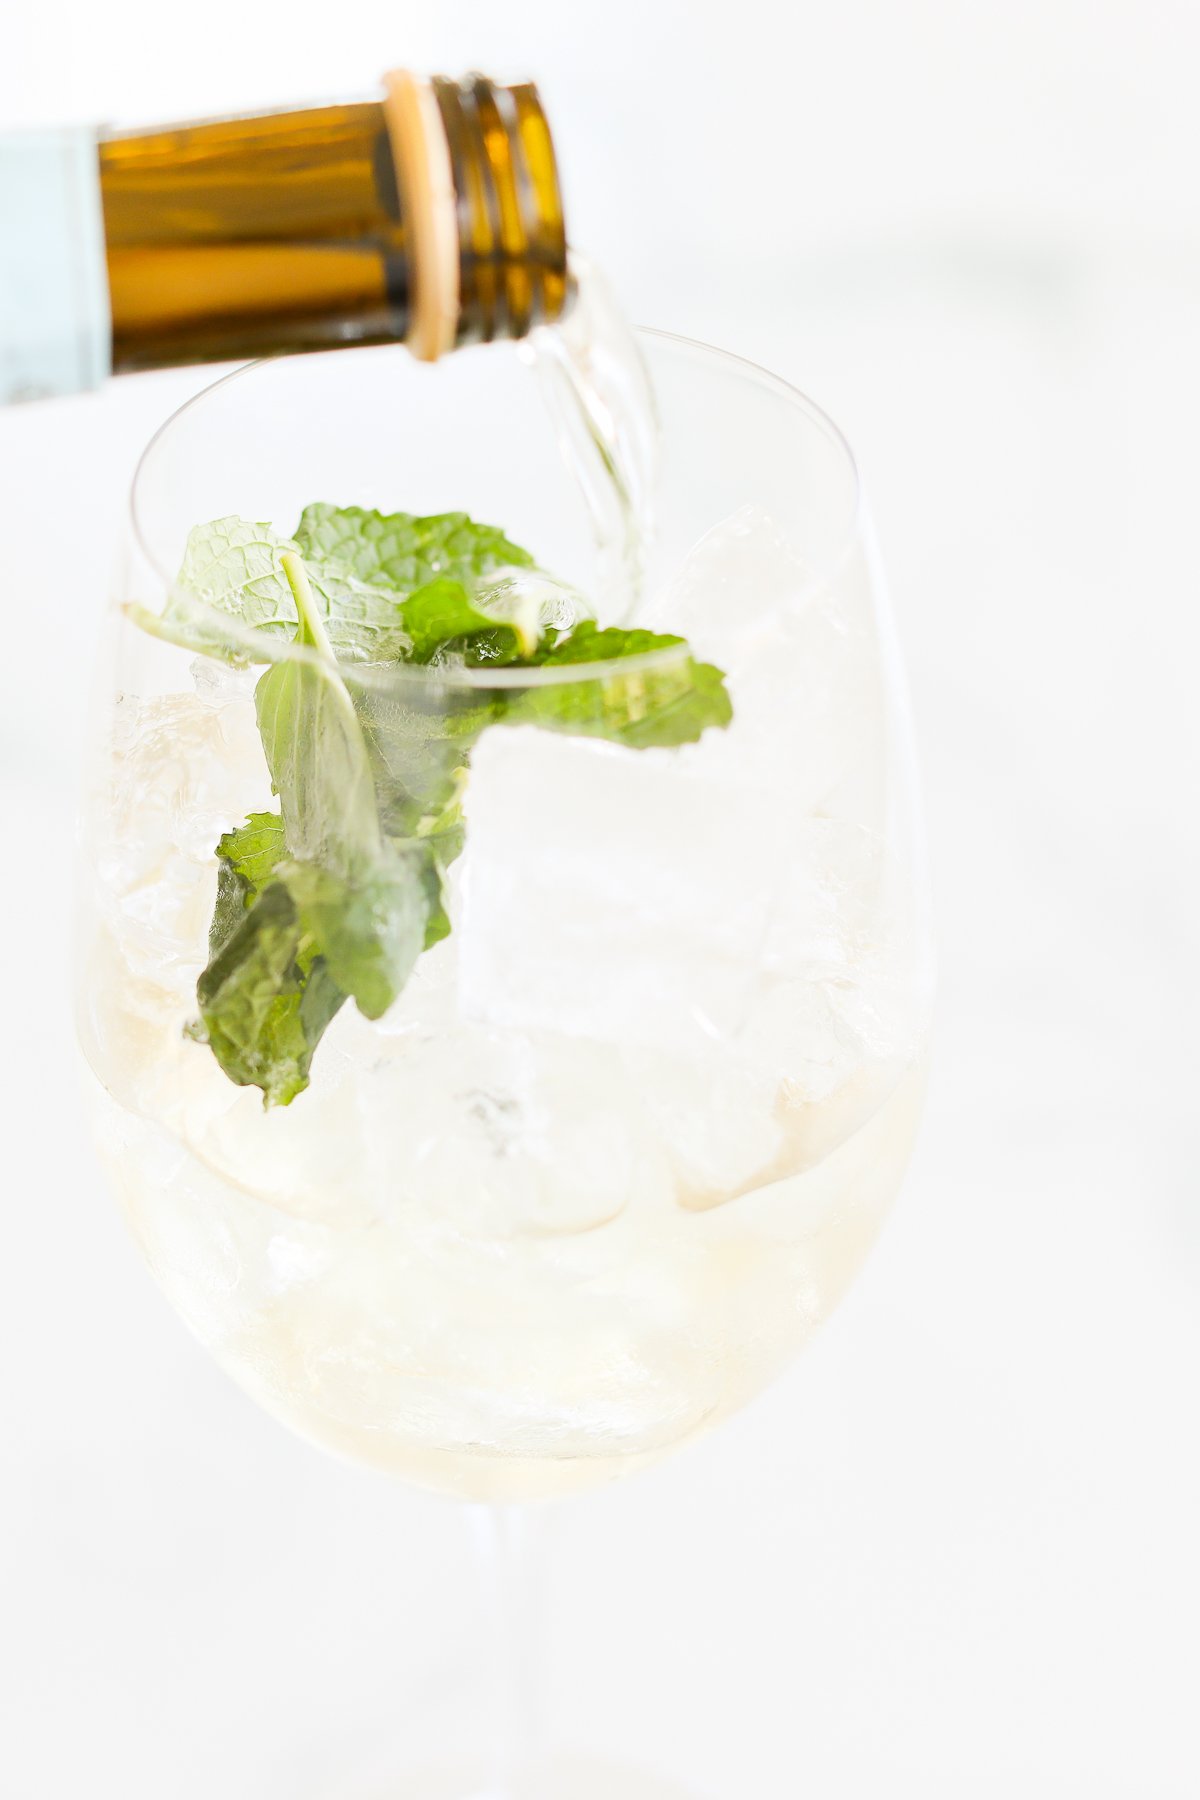 Pouring a Hugo spritz into a glass with ice and mint leaves.